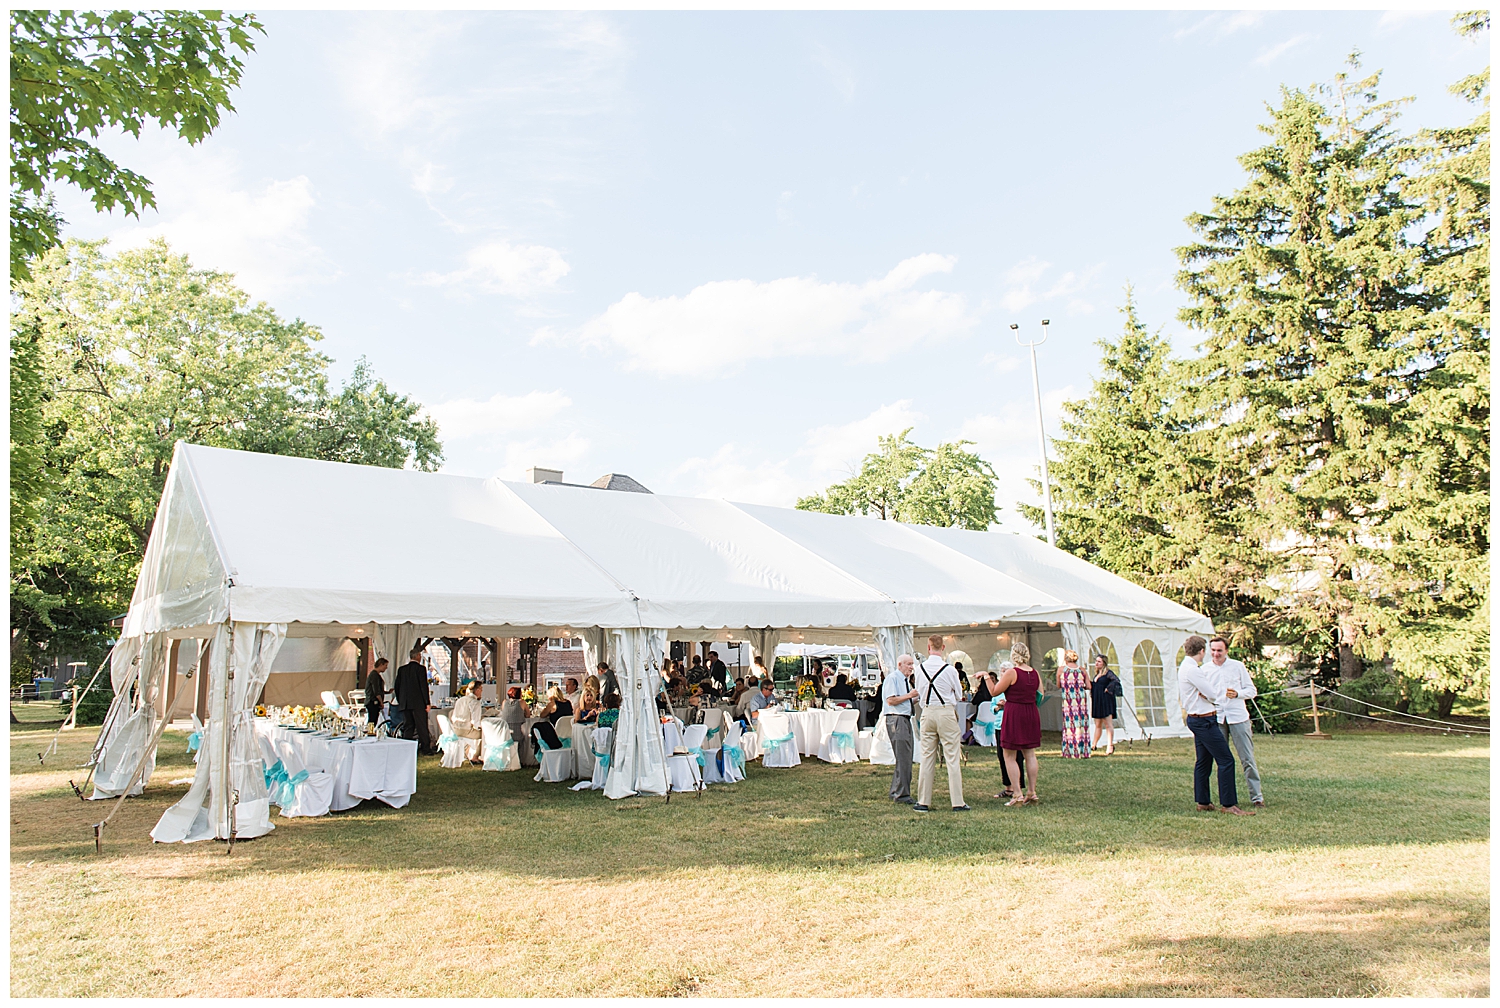 Outdoor tented wedding reception at Markham Museum